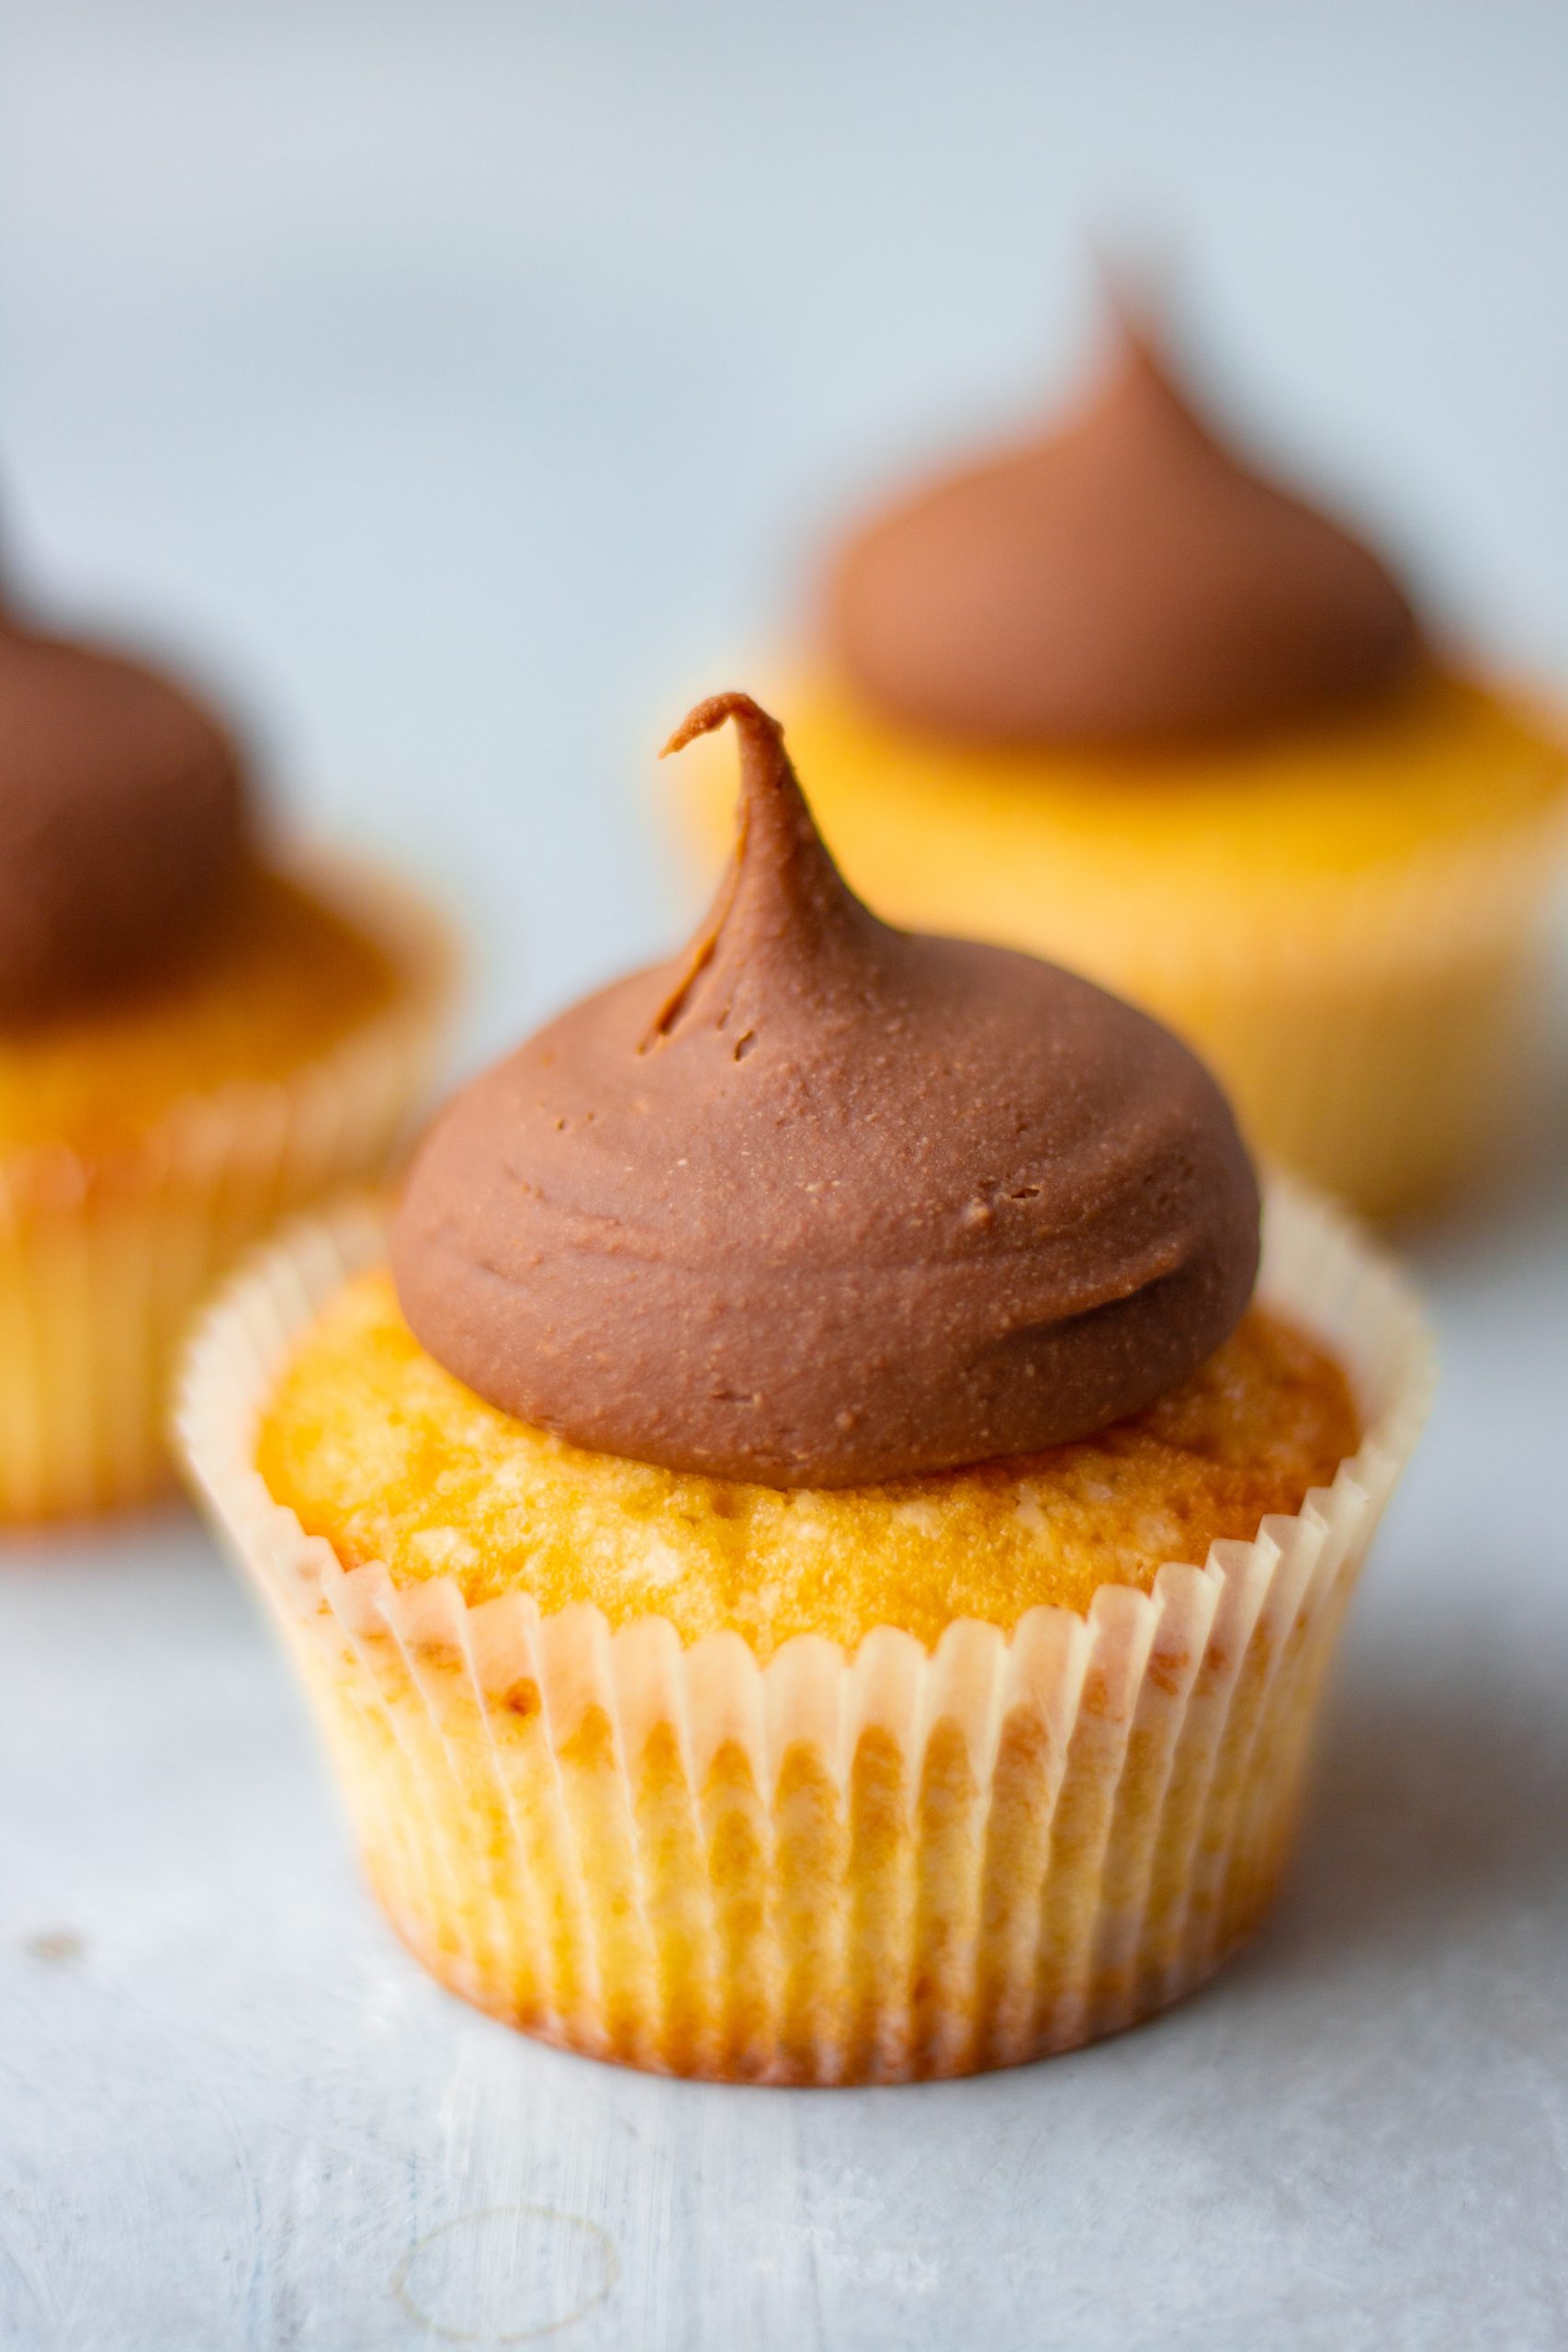 easy chocolate frosting: no equipment required! - Bake with Shivesh